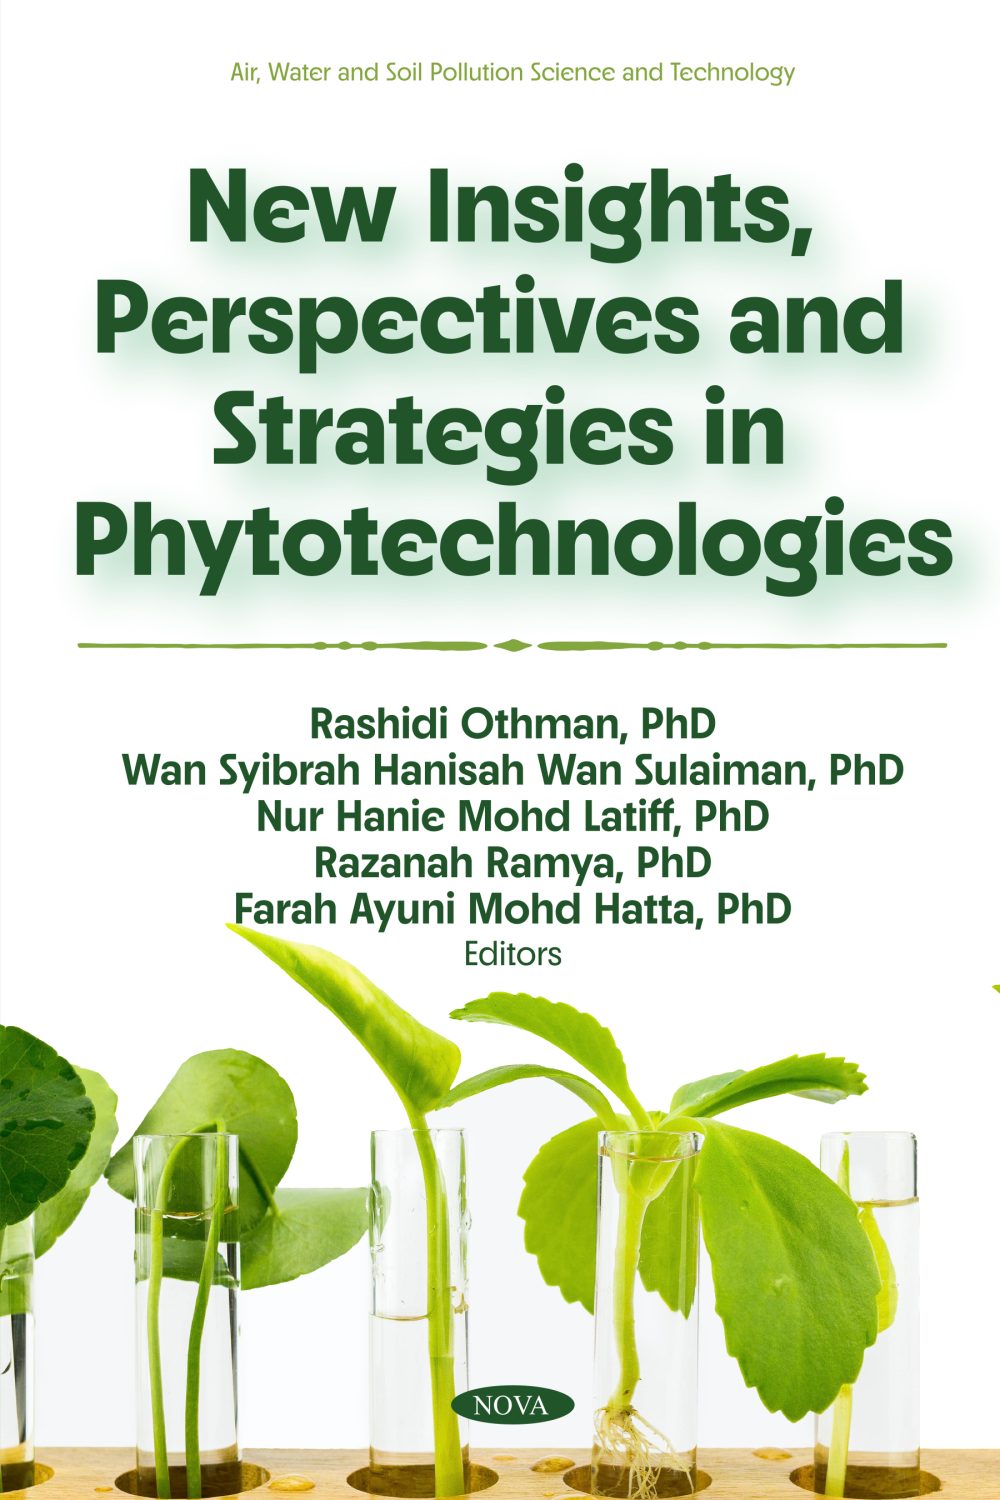 New Insights, Perspectives and Strategies in Phytotechnologies